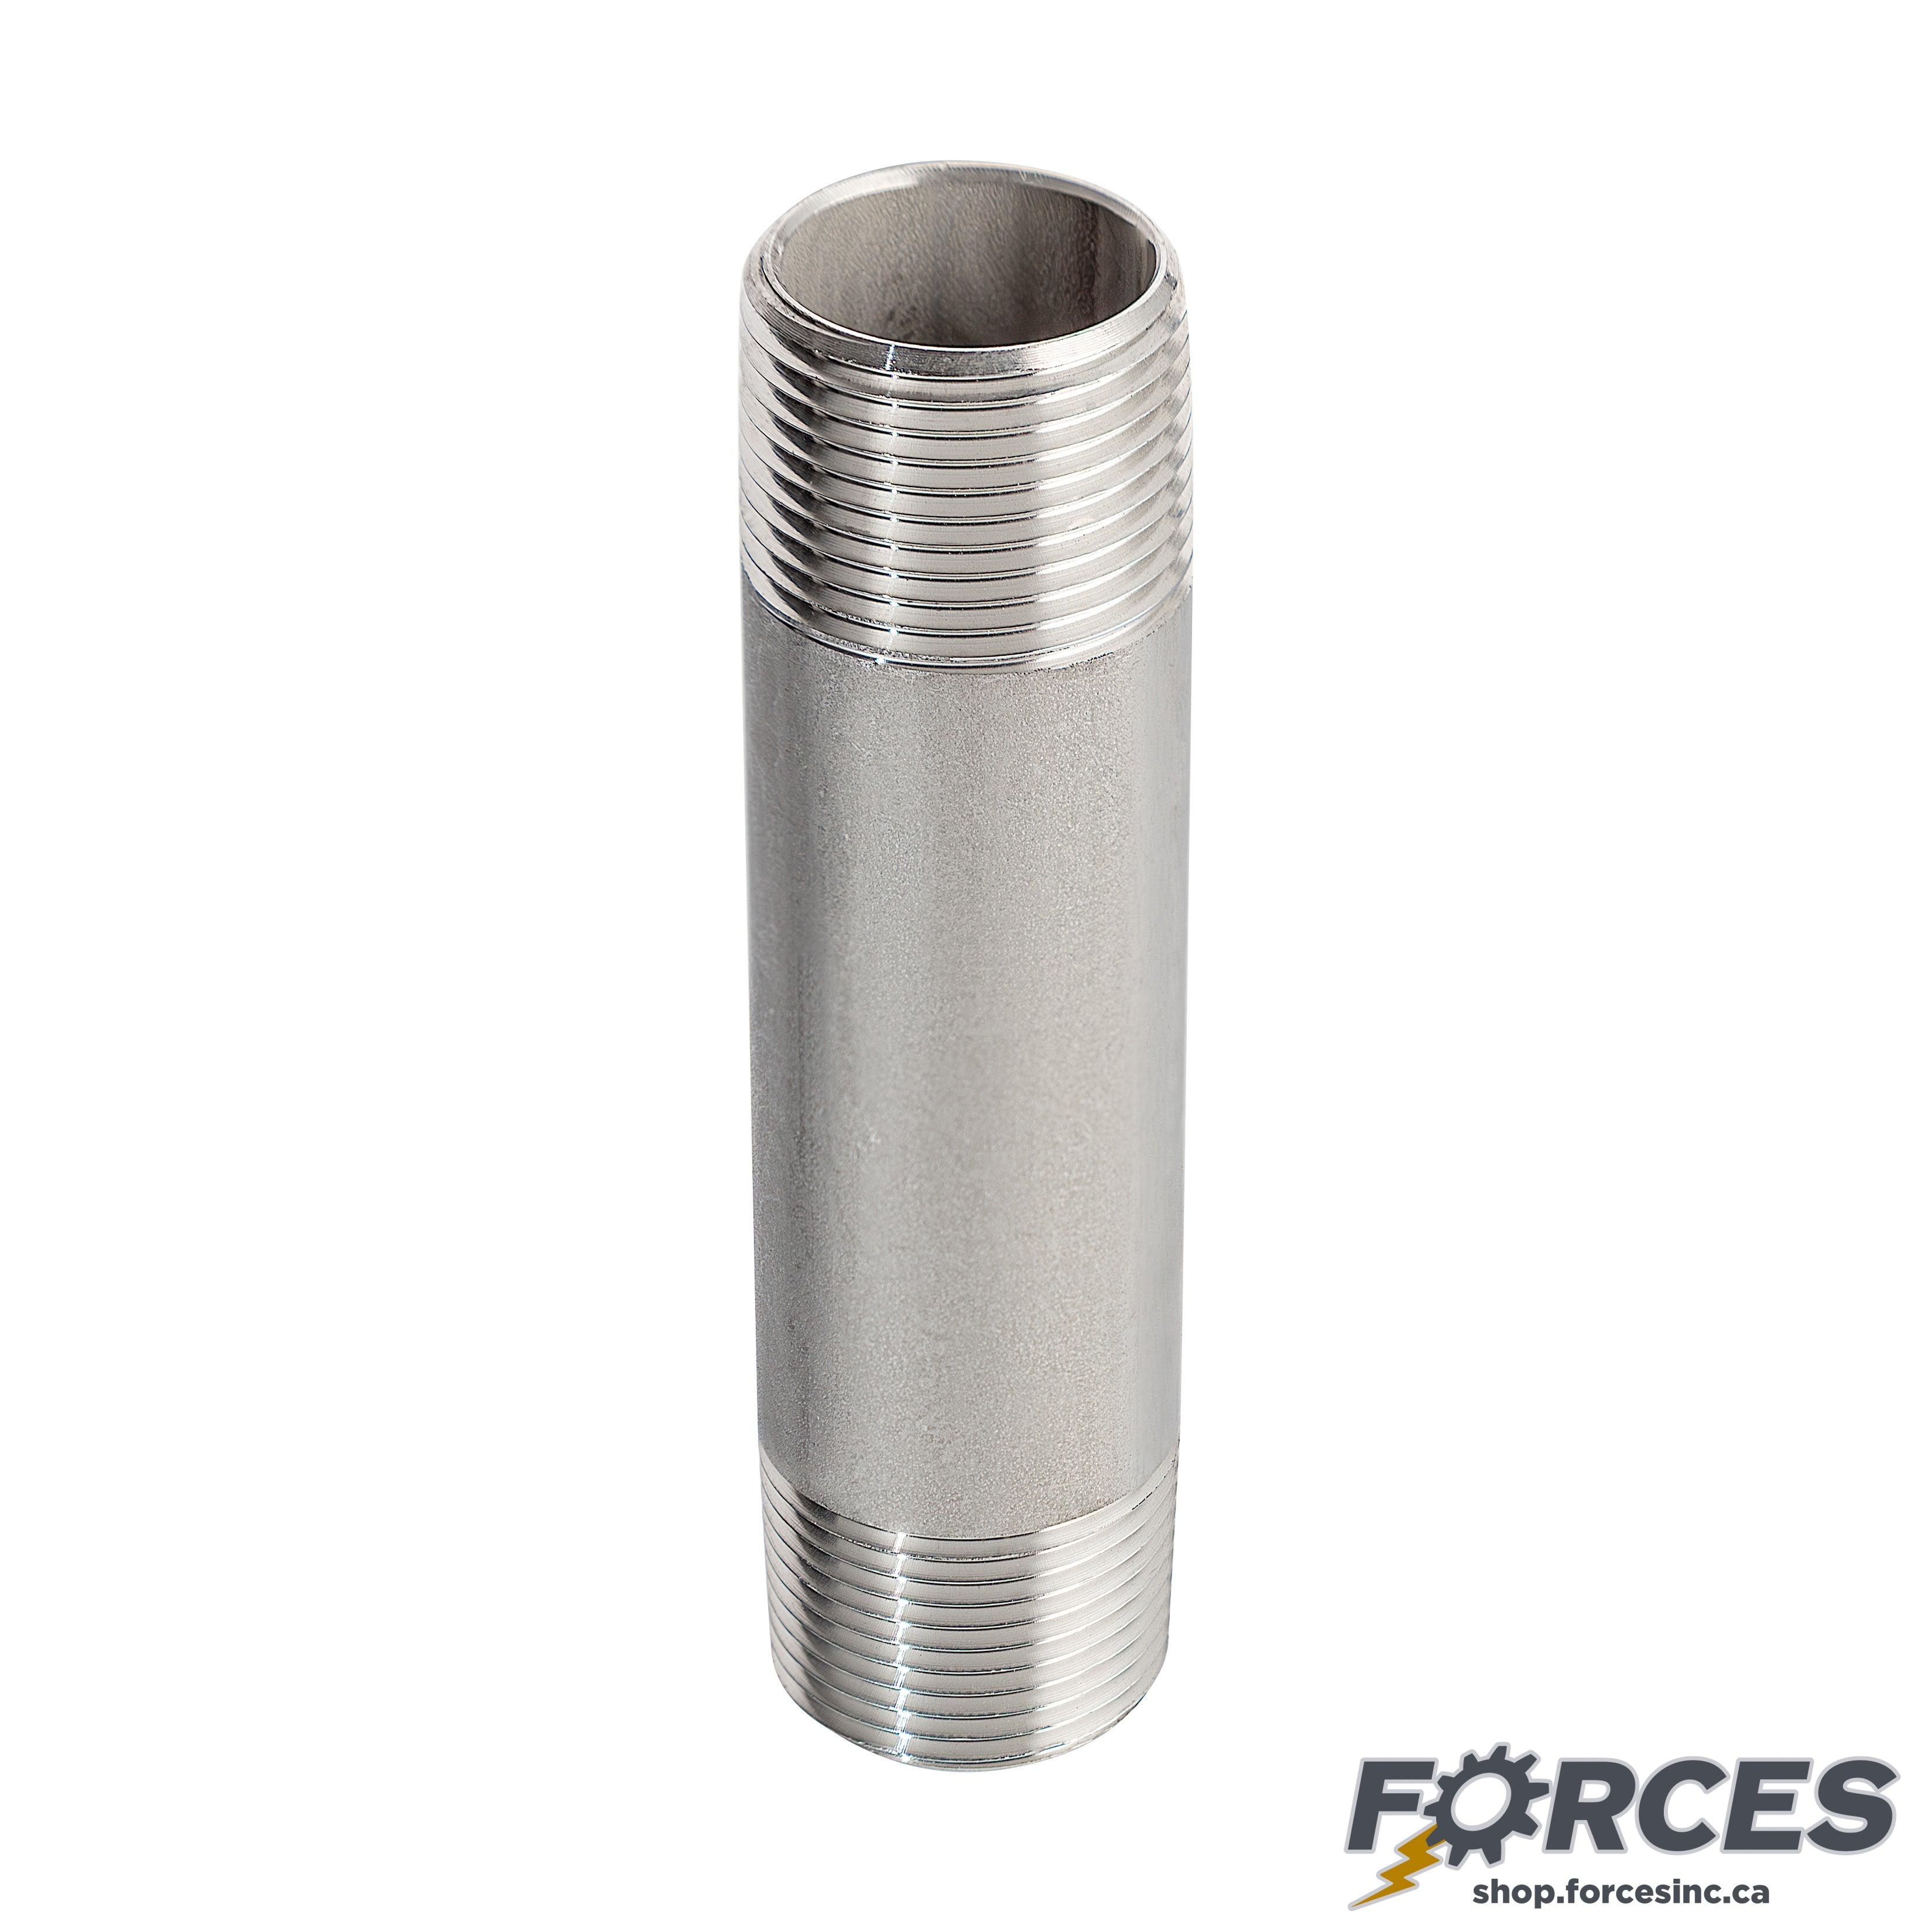 1/8" X 2-1/2" Long Nipple - Stainless Steel 316 - Forces Inc